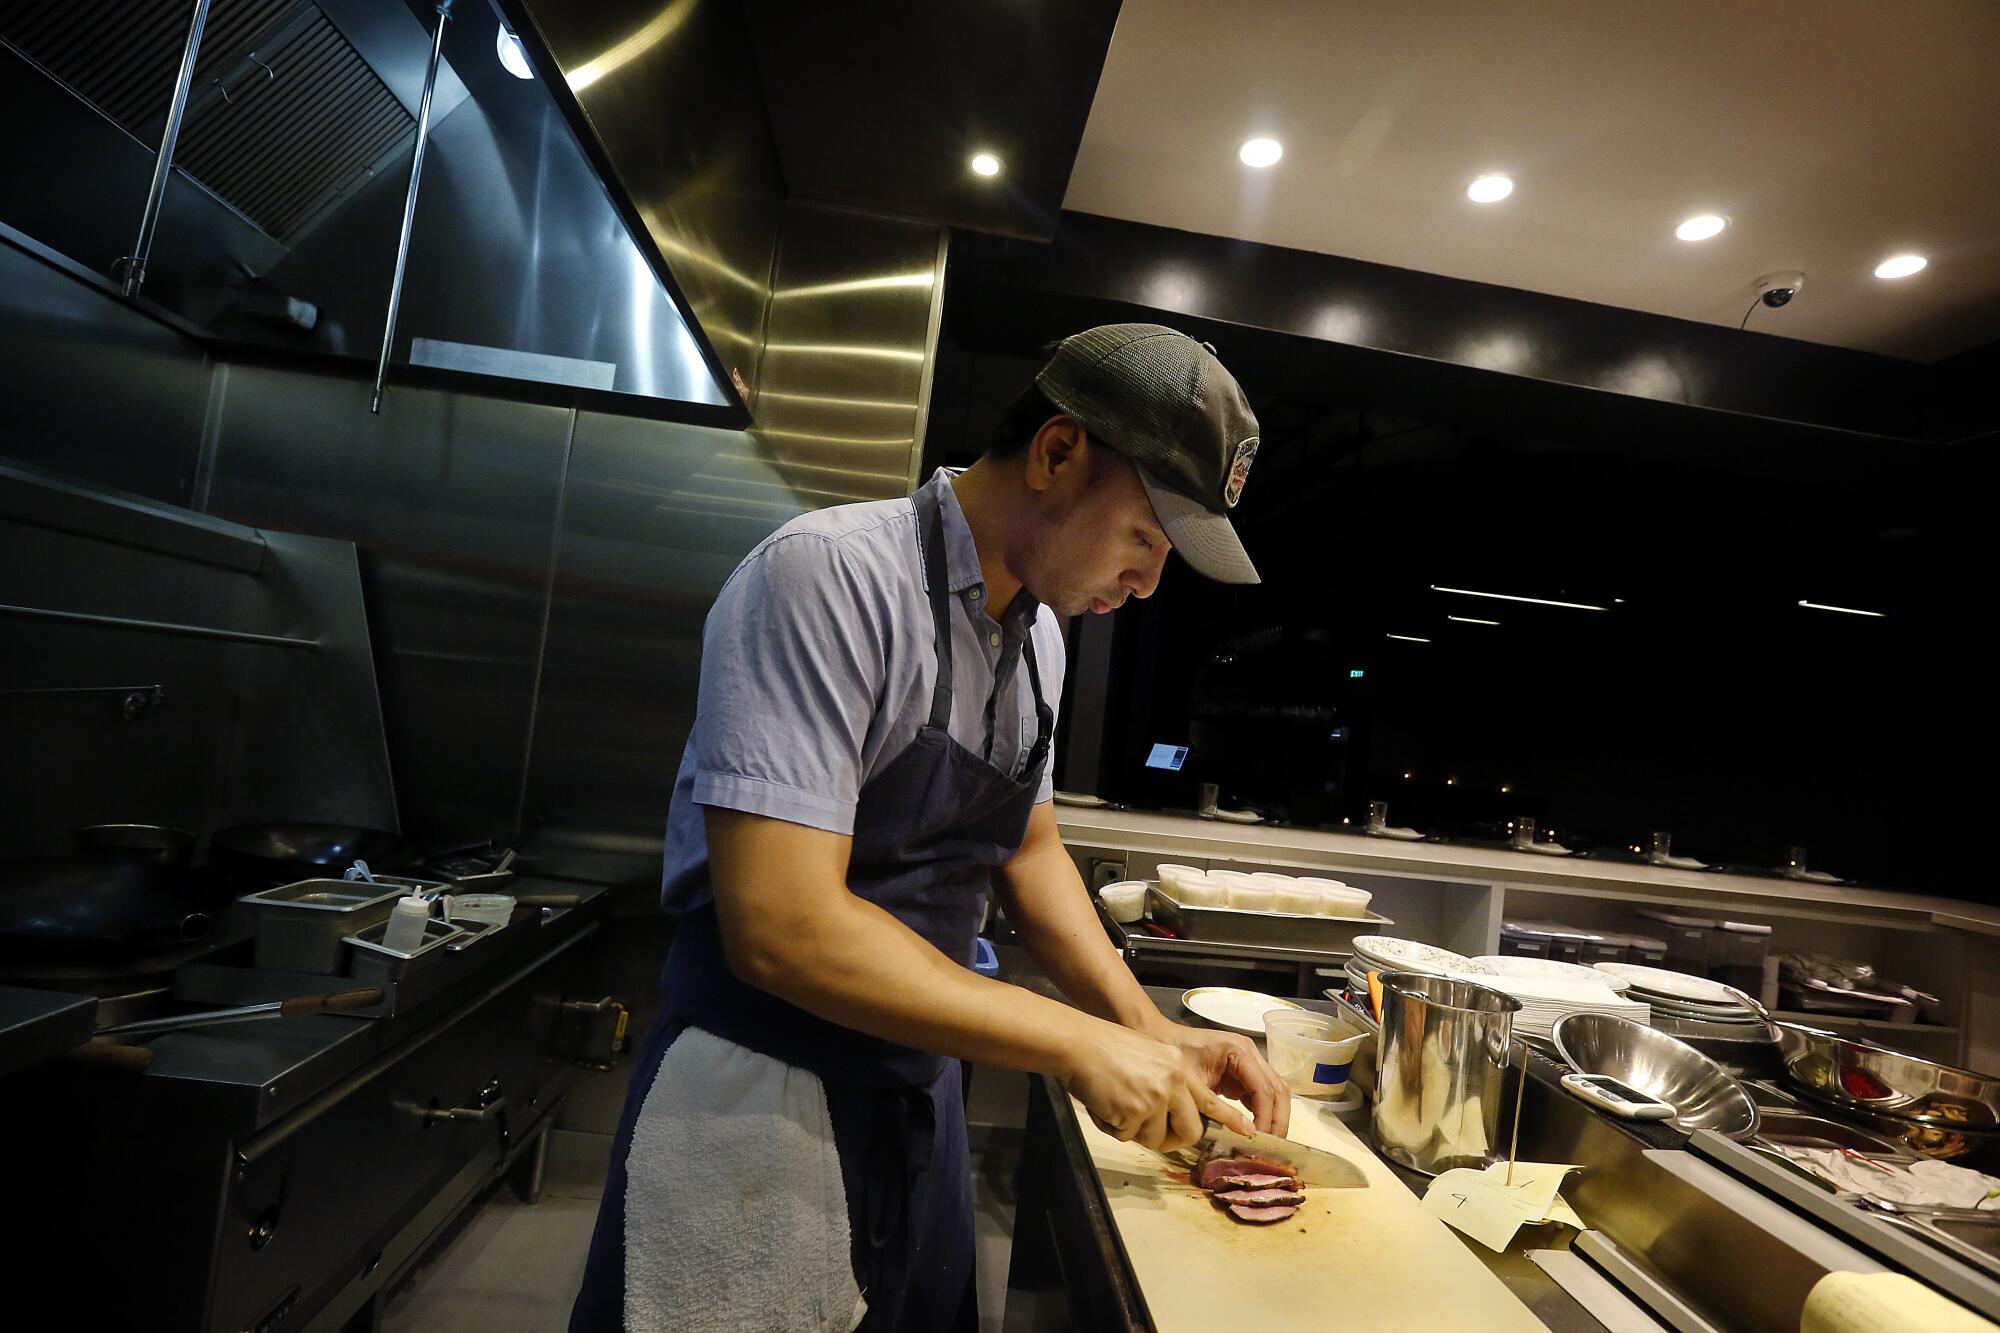 Shawn Pham works in Simbal's kitchen.